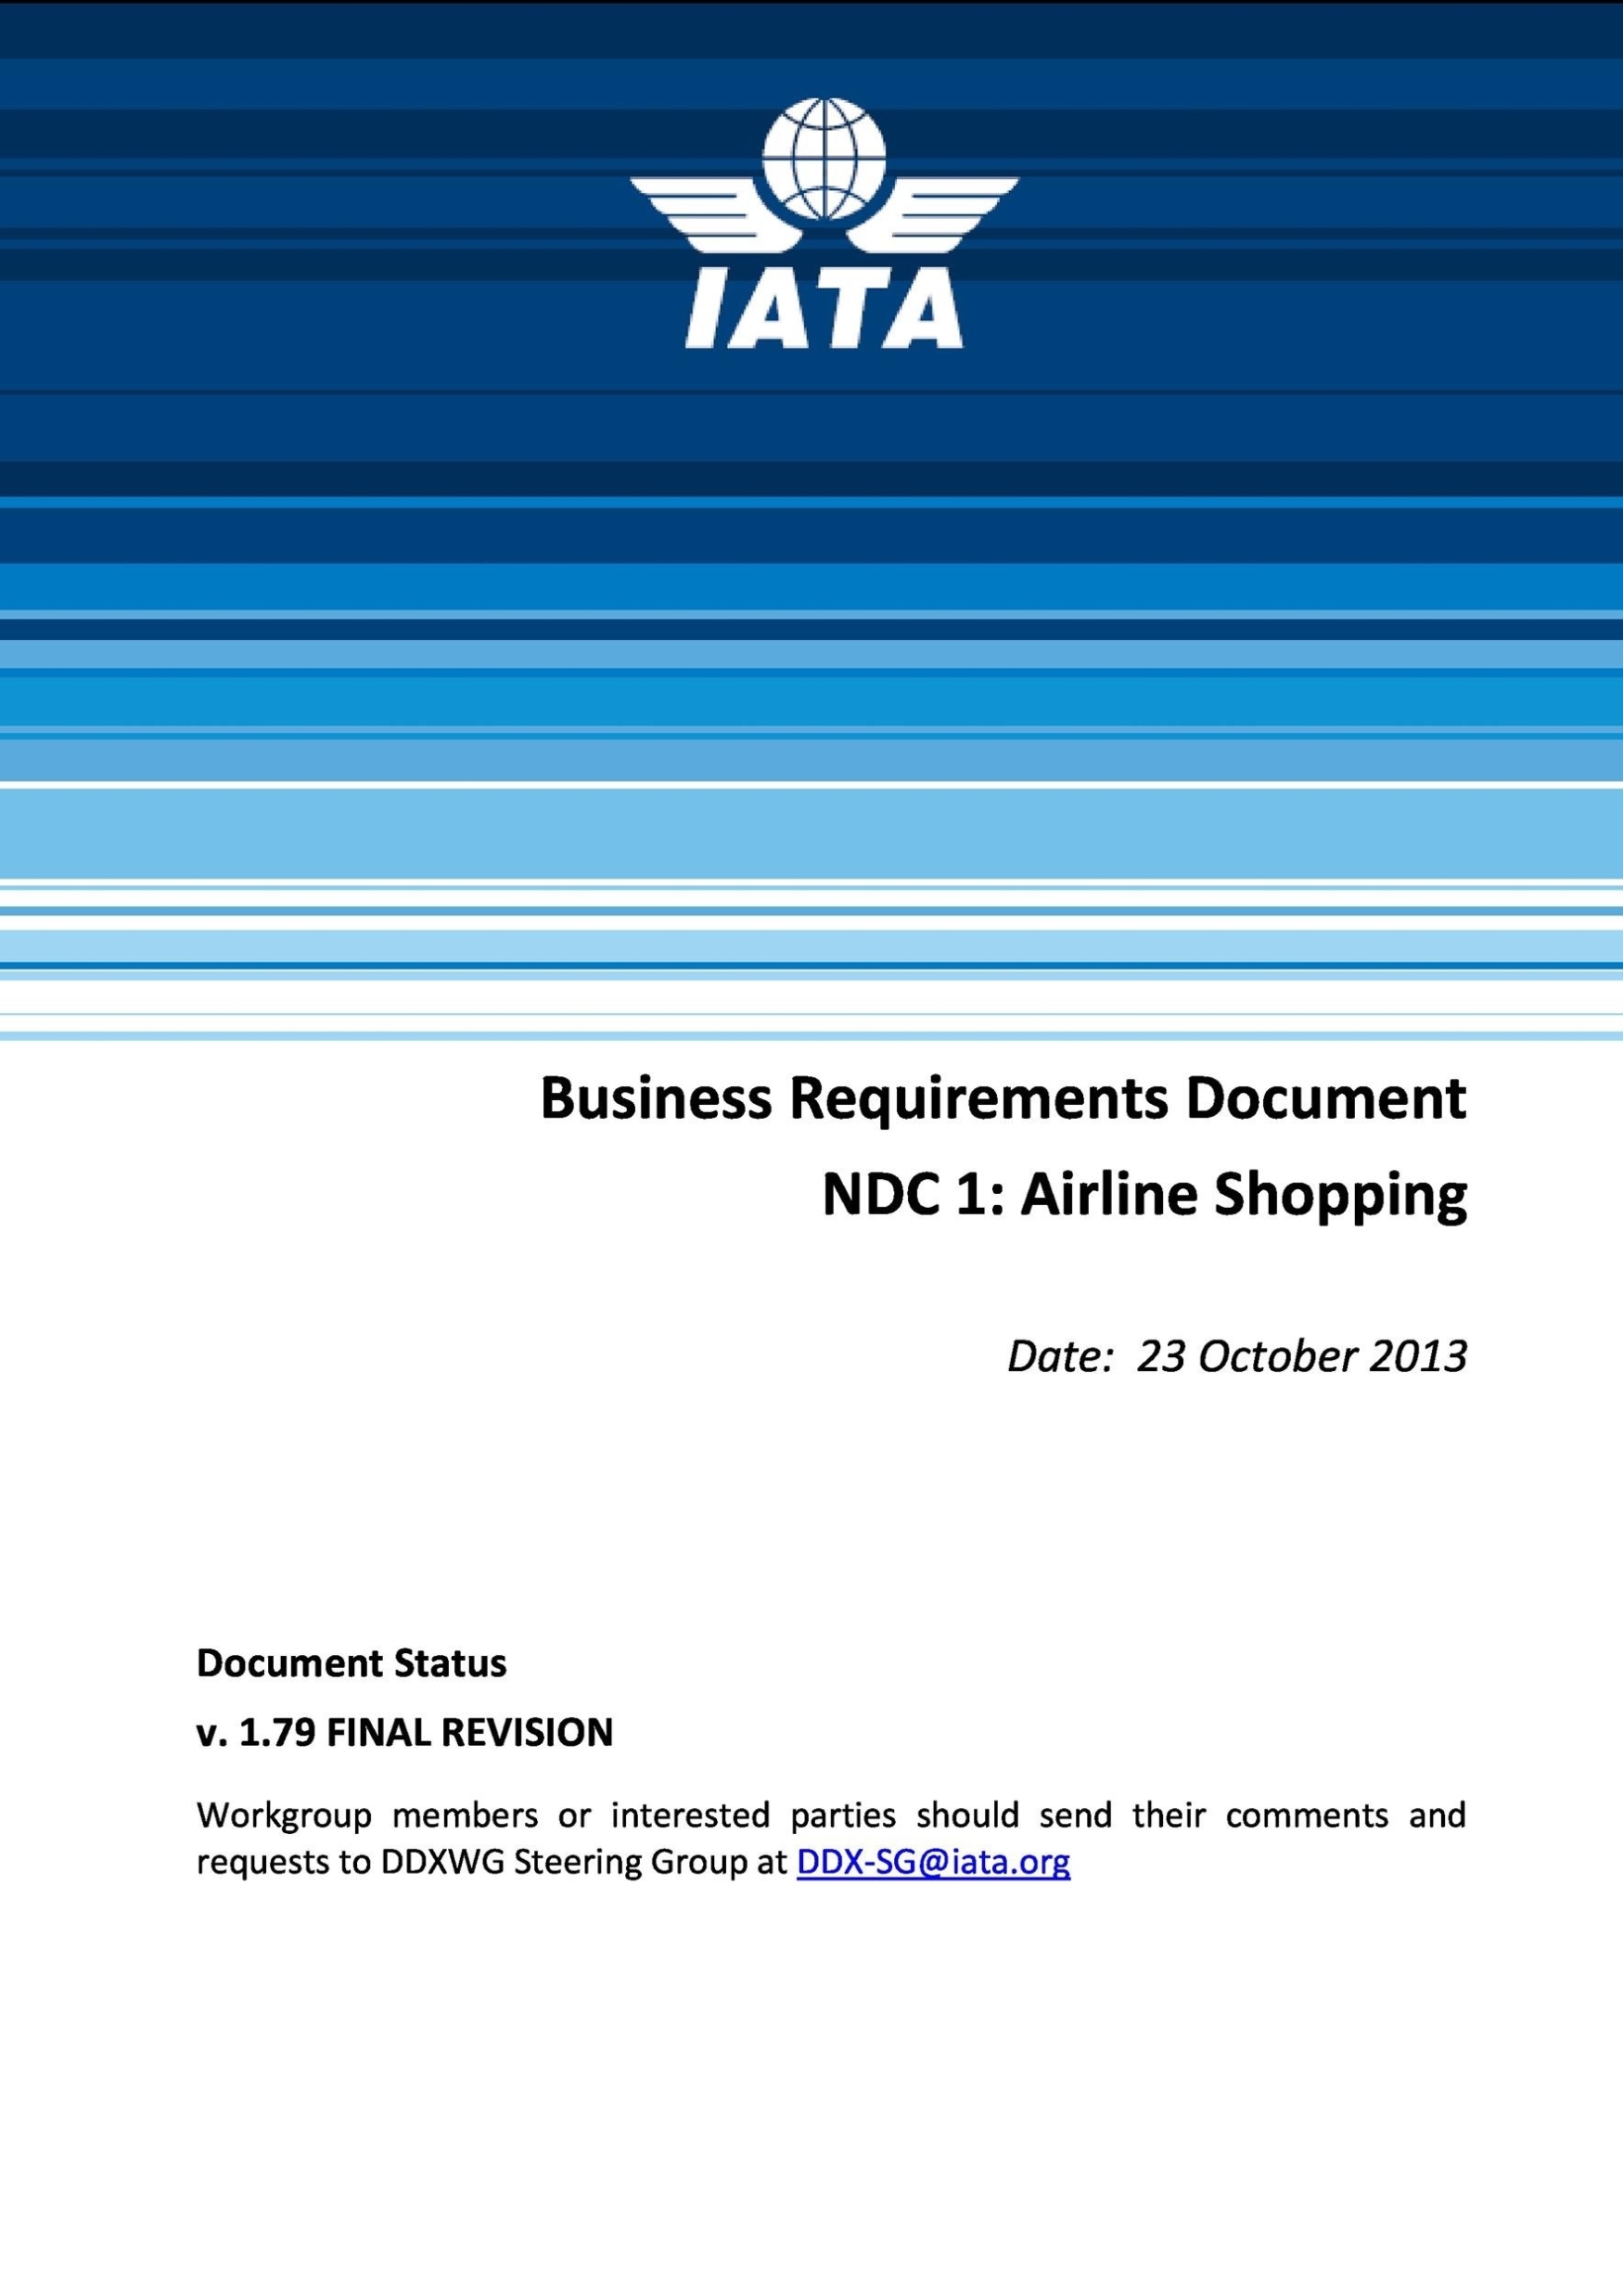 40+ Simple Business Requirements Document Templates ᐅ Templatelab Regarding Example Business Requirements Document Template